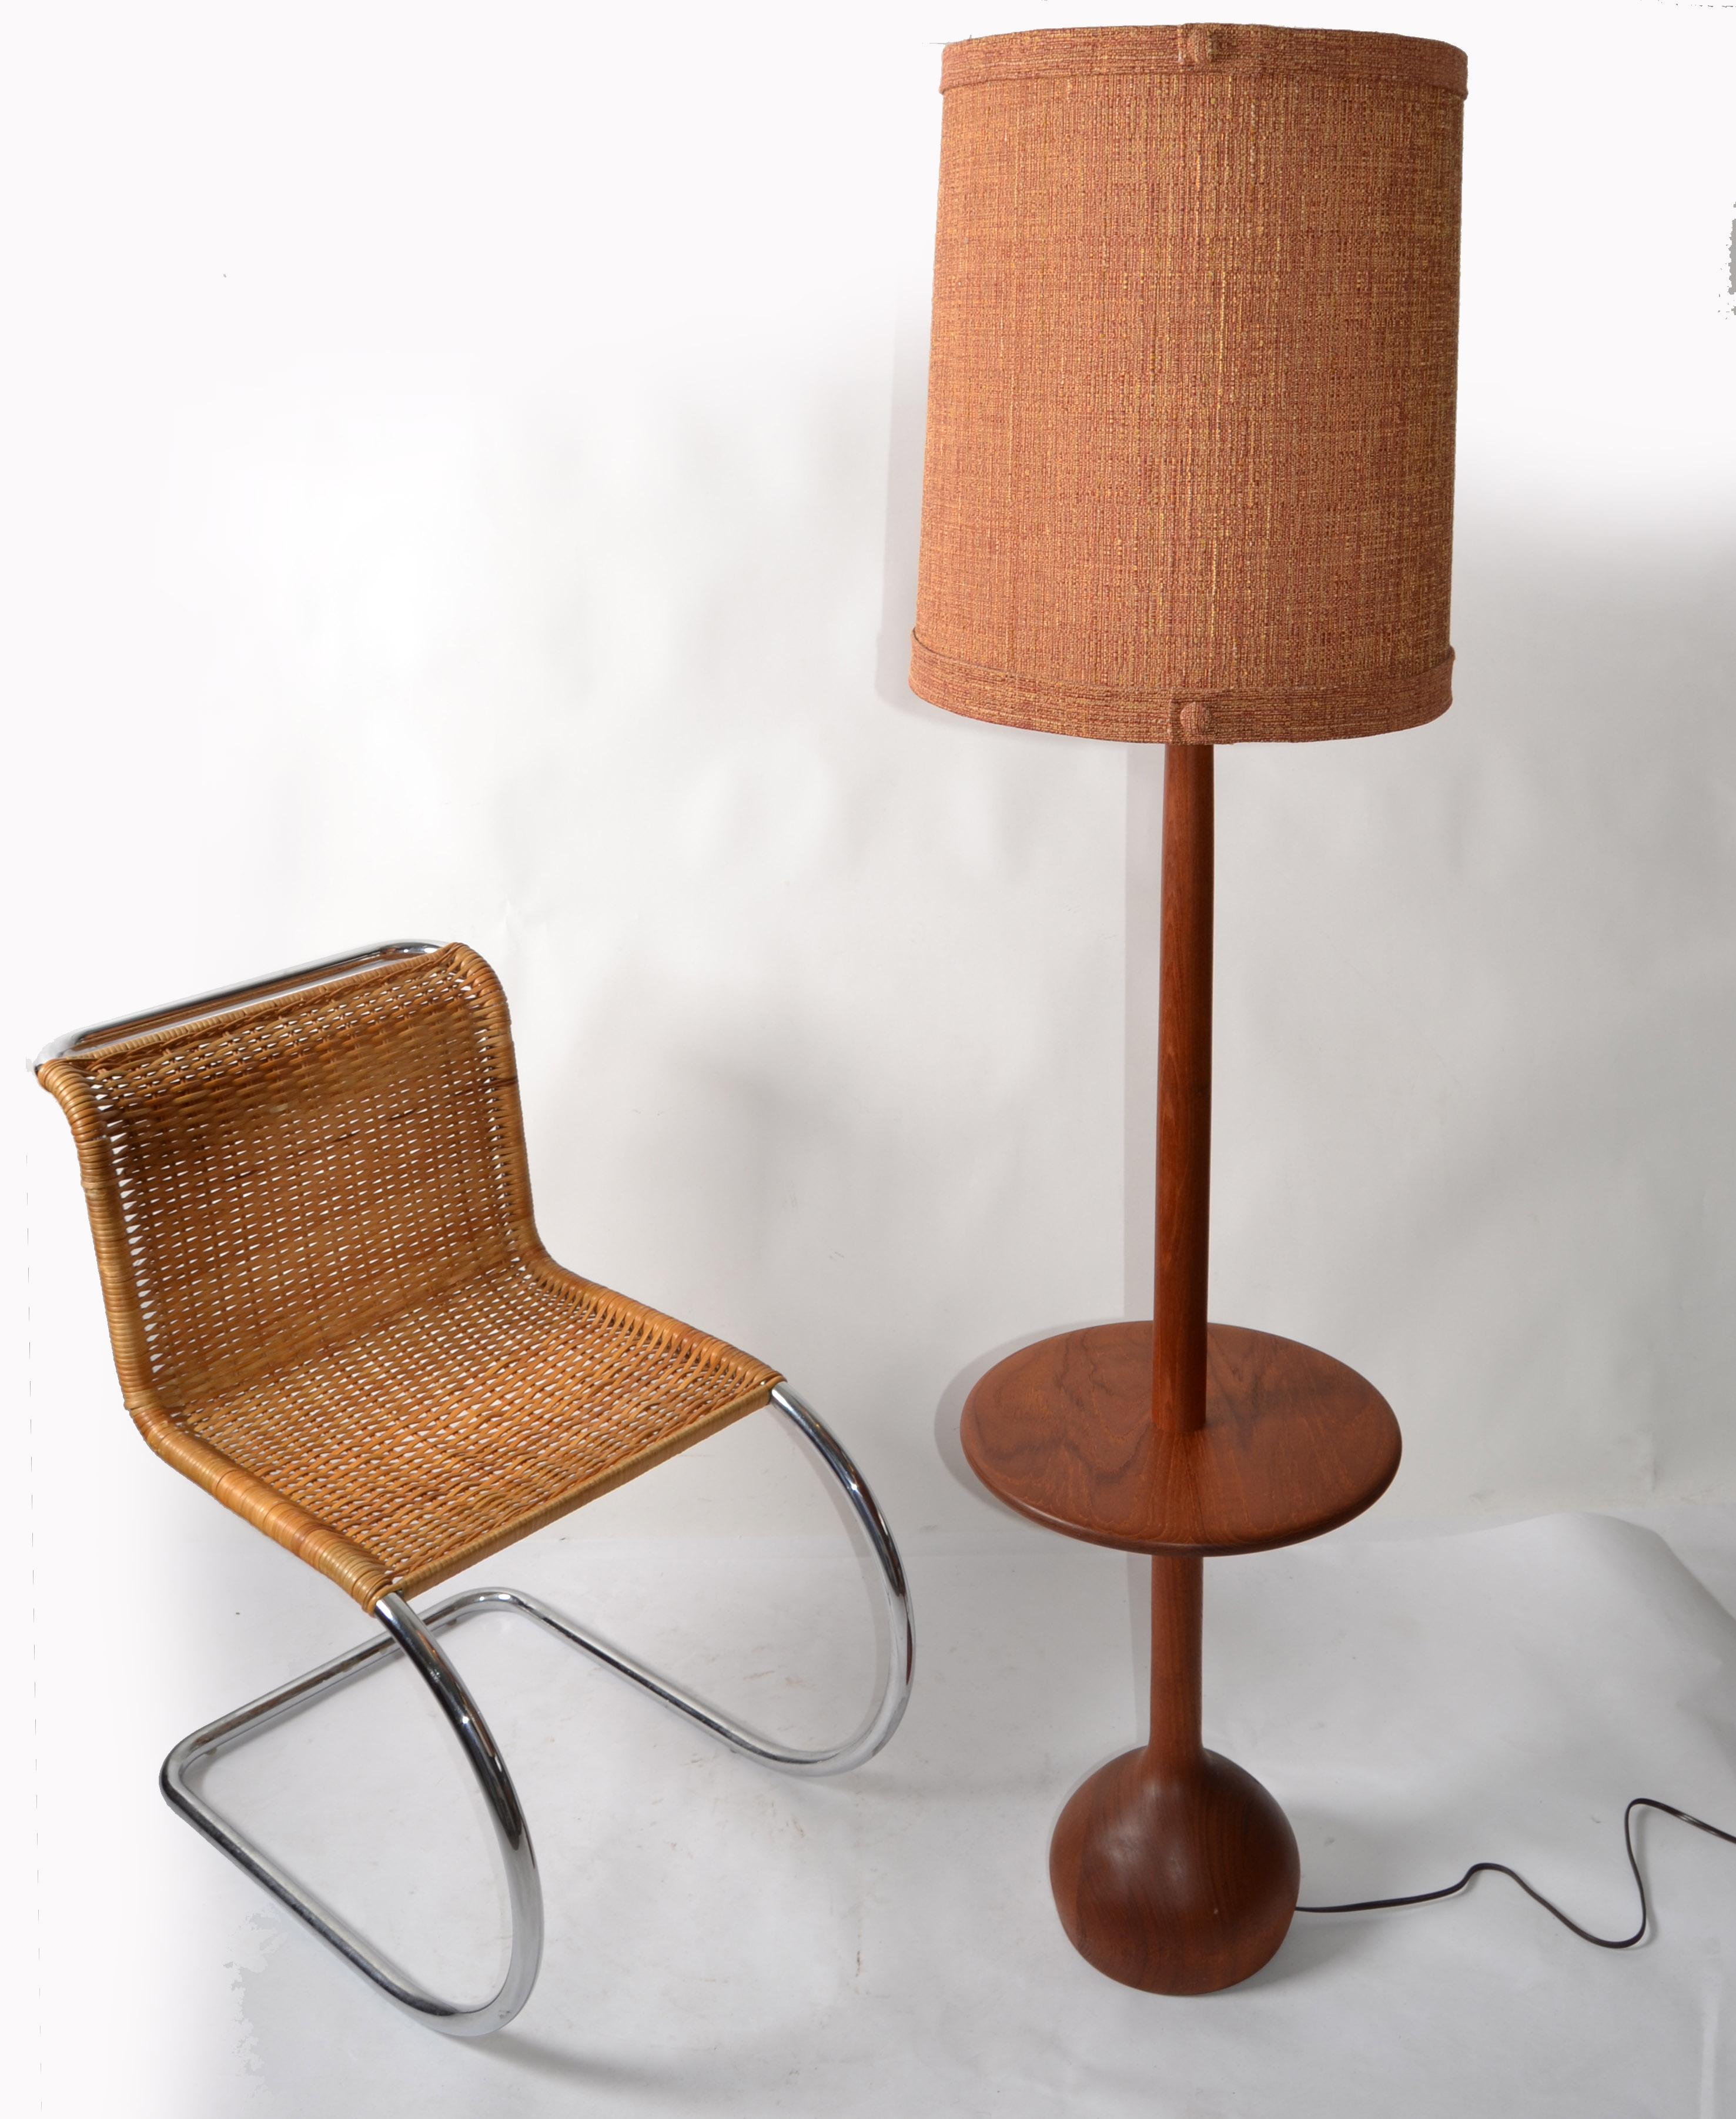 American Turned Walnut Floor Lamp with a round Center Table and Original Fabric Shade.
The handmade Stem is turned out of one piece of Walnut and has an organic round Base.
Note the stunning pattern of the Walnut Wood. 
US Rewiring and takes 1